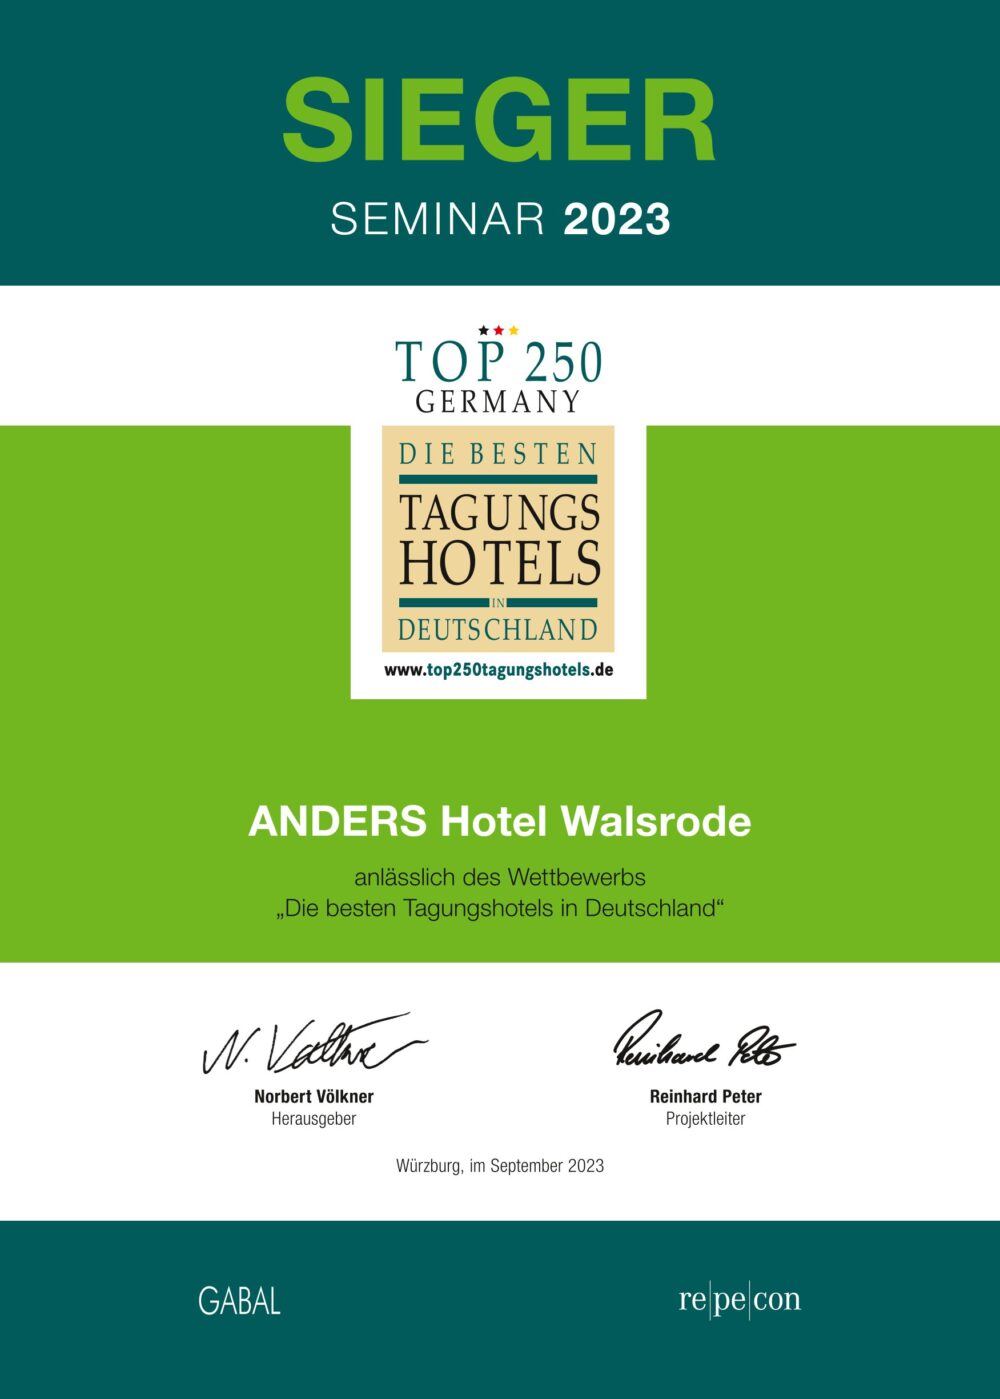 Awards - ANDERS Hotel Walsrode